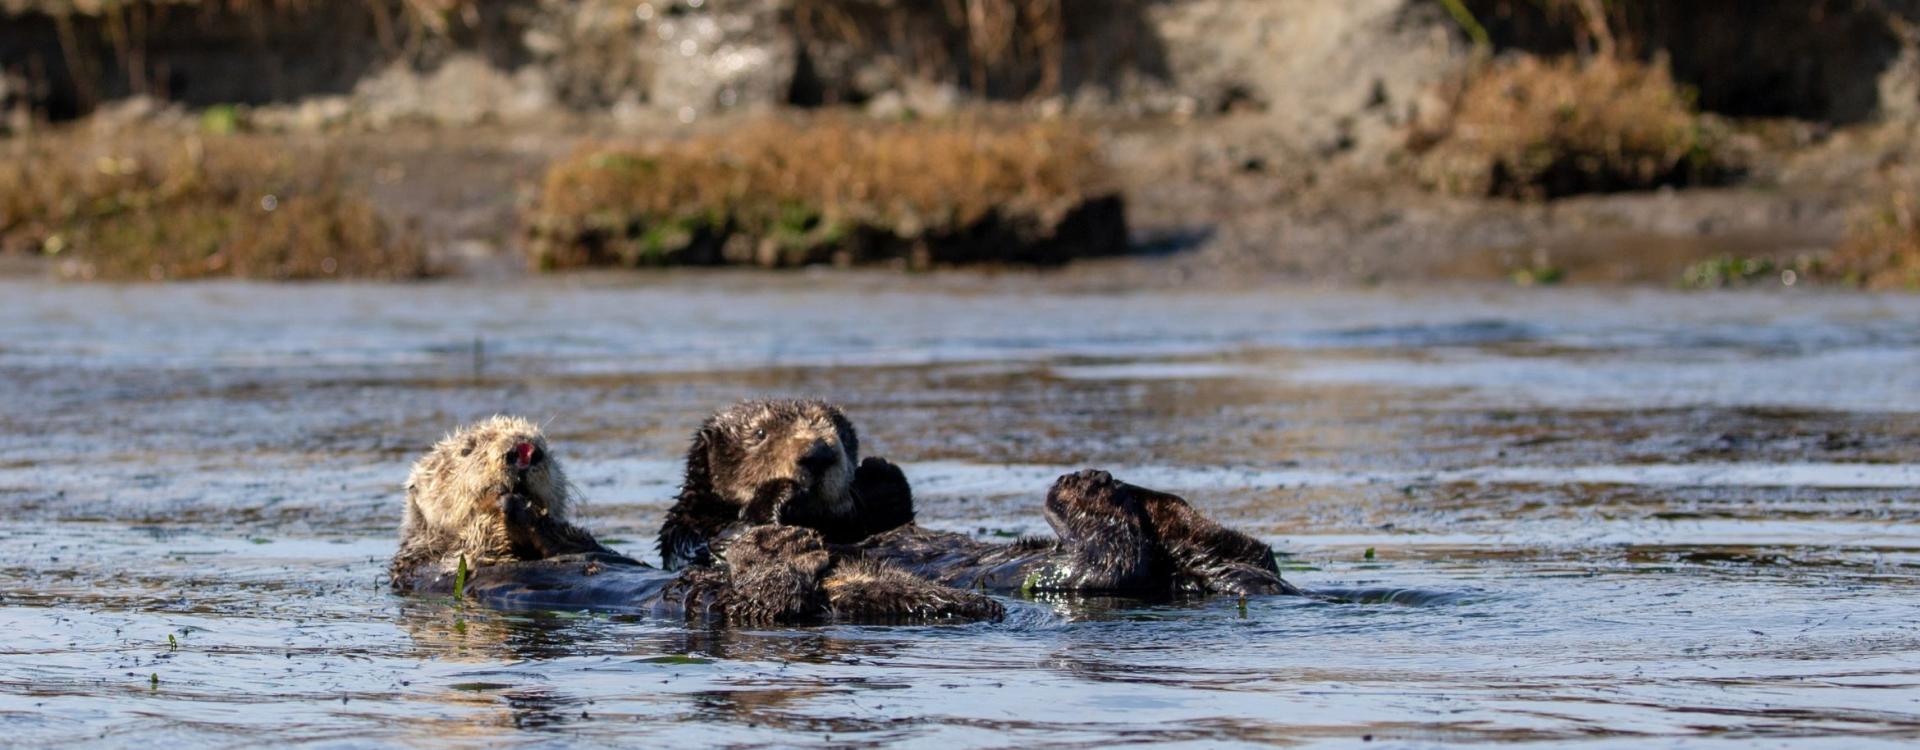 California Sea Otters floating on its back